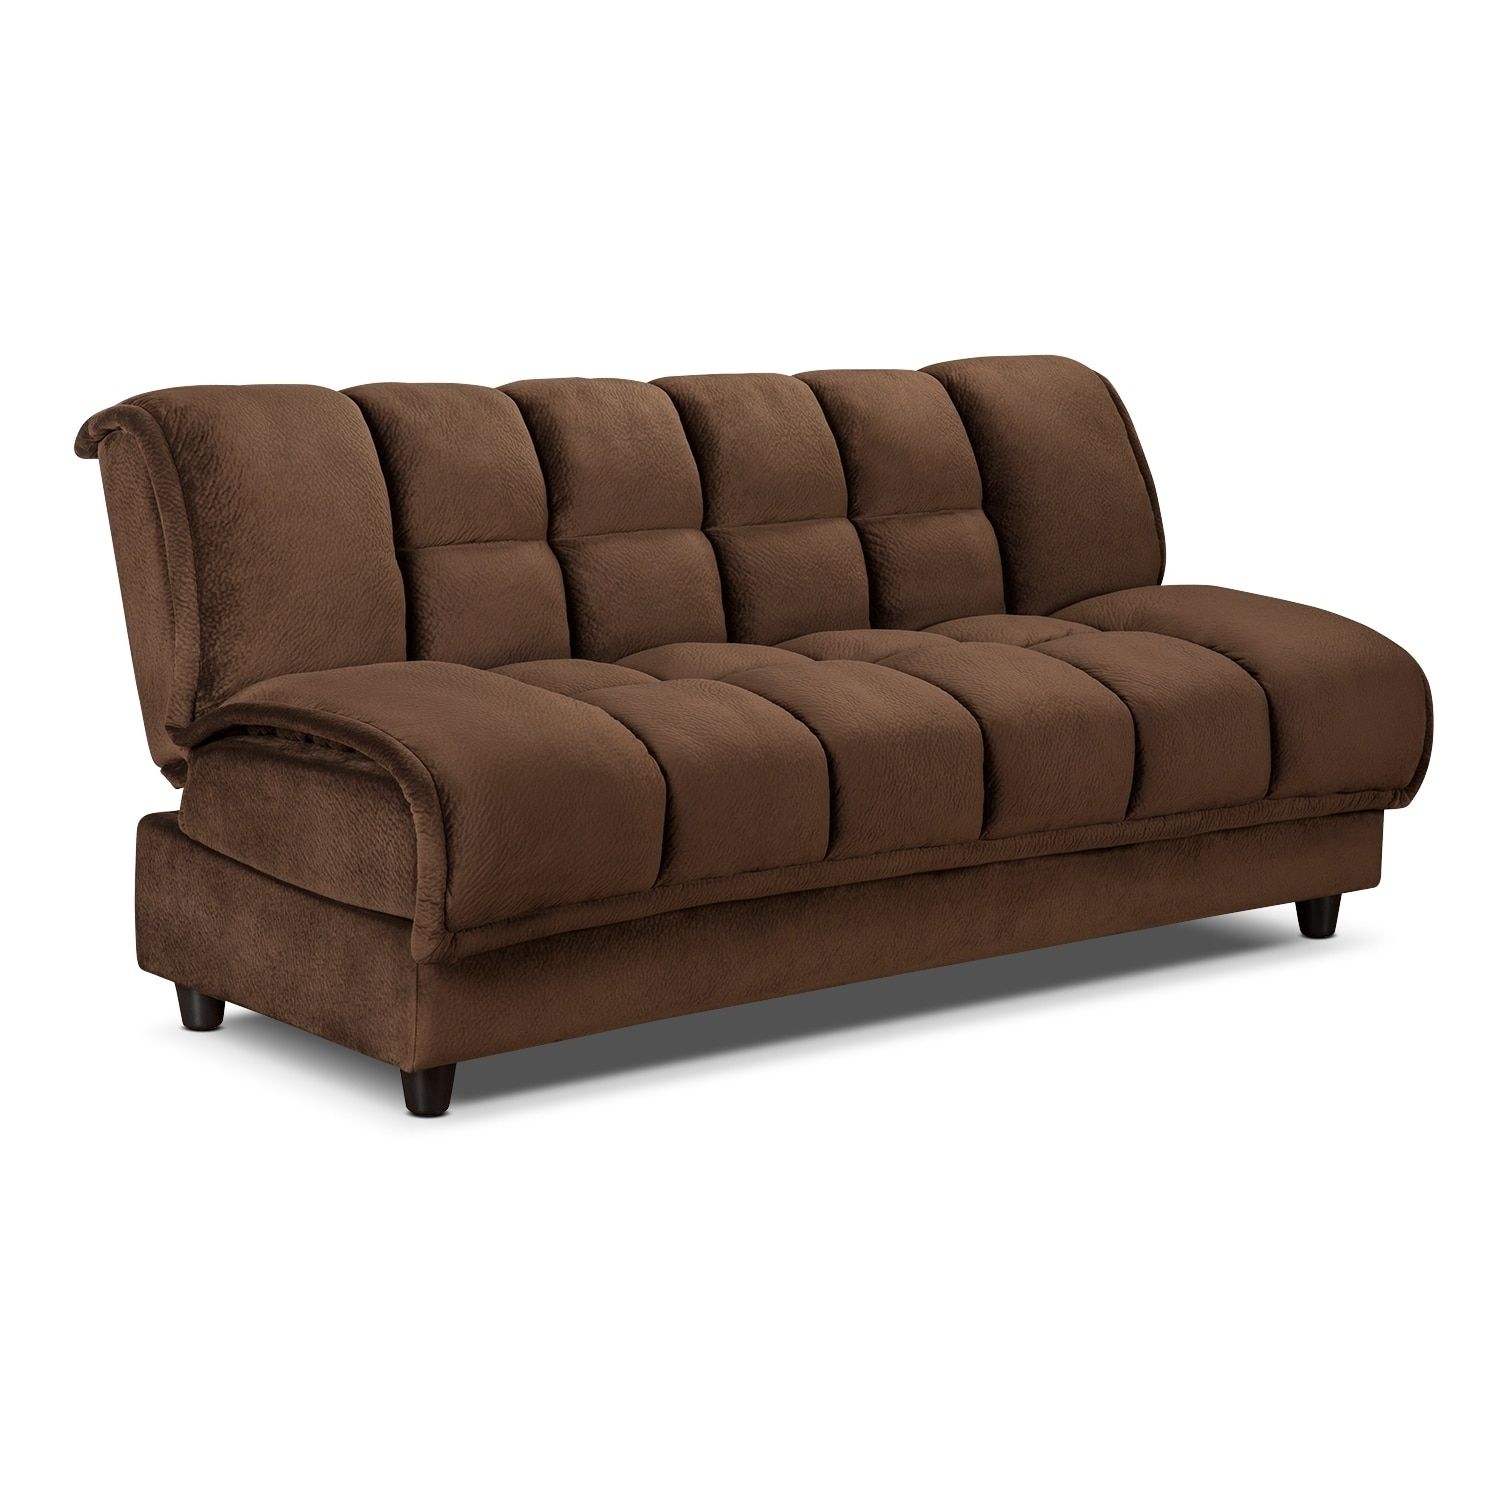 Furniture: Cheap Sectional Sofas Under 300 | Costco Couches Regarding Tallahassee Sectional Sofas (View 6 of 10)